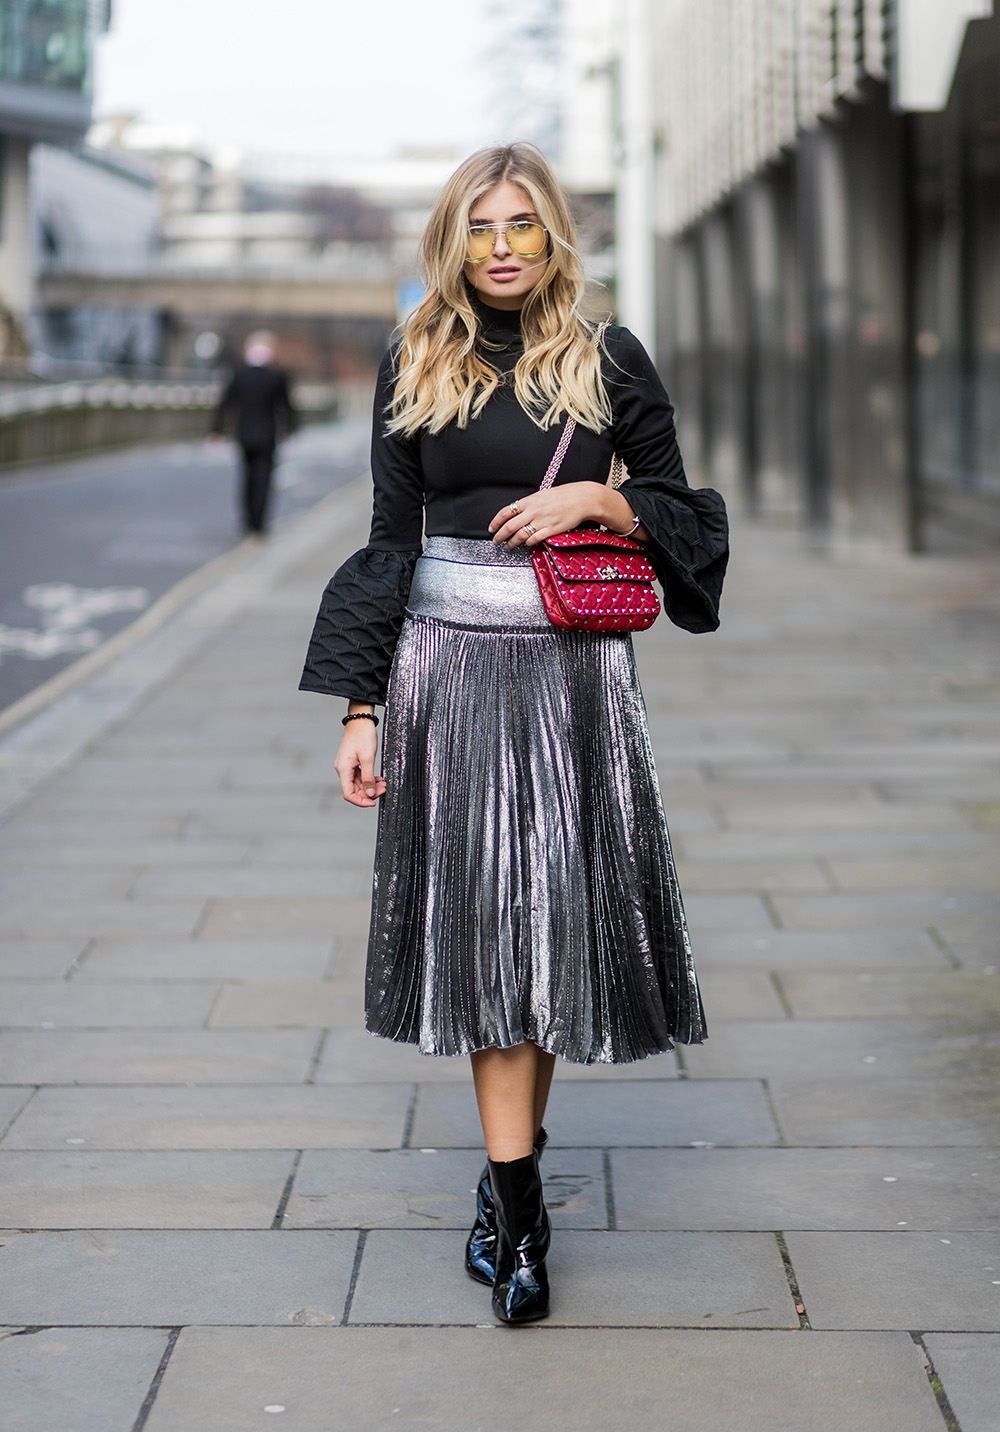 LONDON, ENGLAND - FEBRUARY 18: Xenia van der Woodsen wearing a black knit, silver skirt, yellow sunglasses outside Julien Macdonald on day 2 of the London Fashion Week February 2017 collections on February 18, 2017 in London, England. (Photo by Christian Vierig/Getty Images)